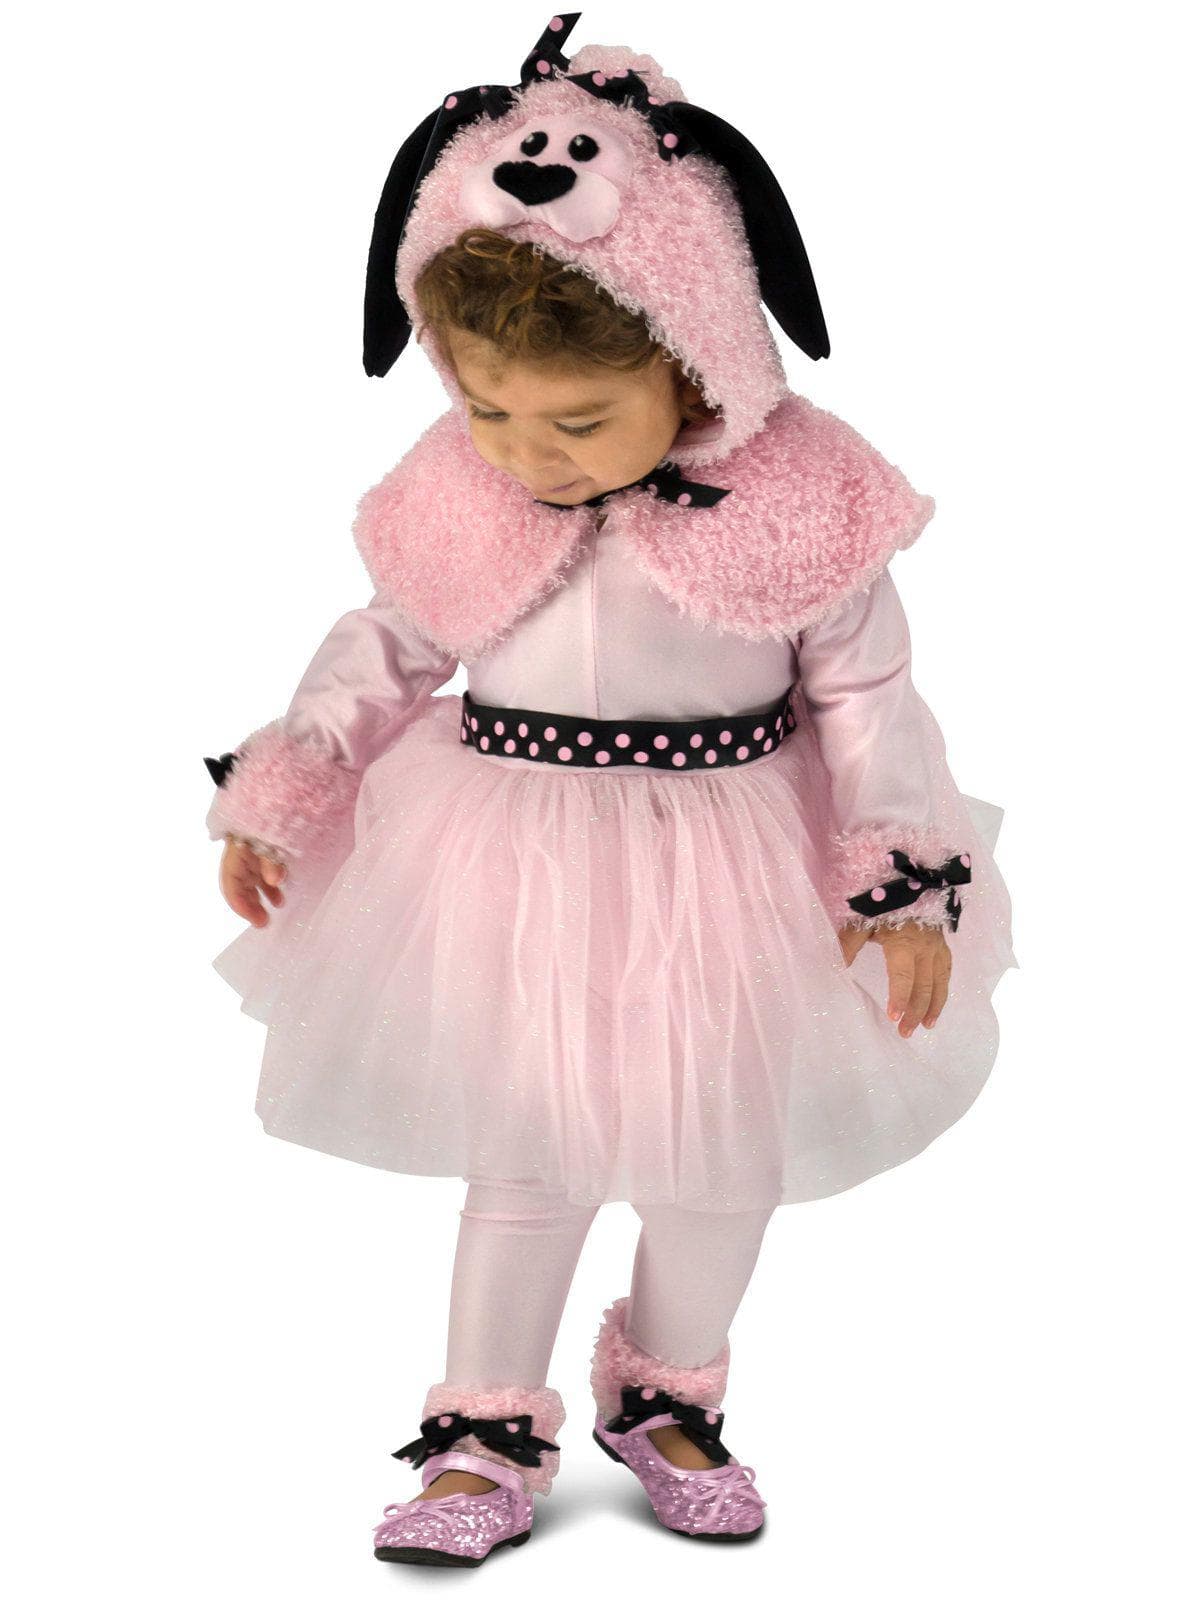 Baby/Toddler Princess Poodle Costume - costumes.com